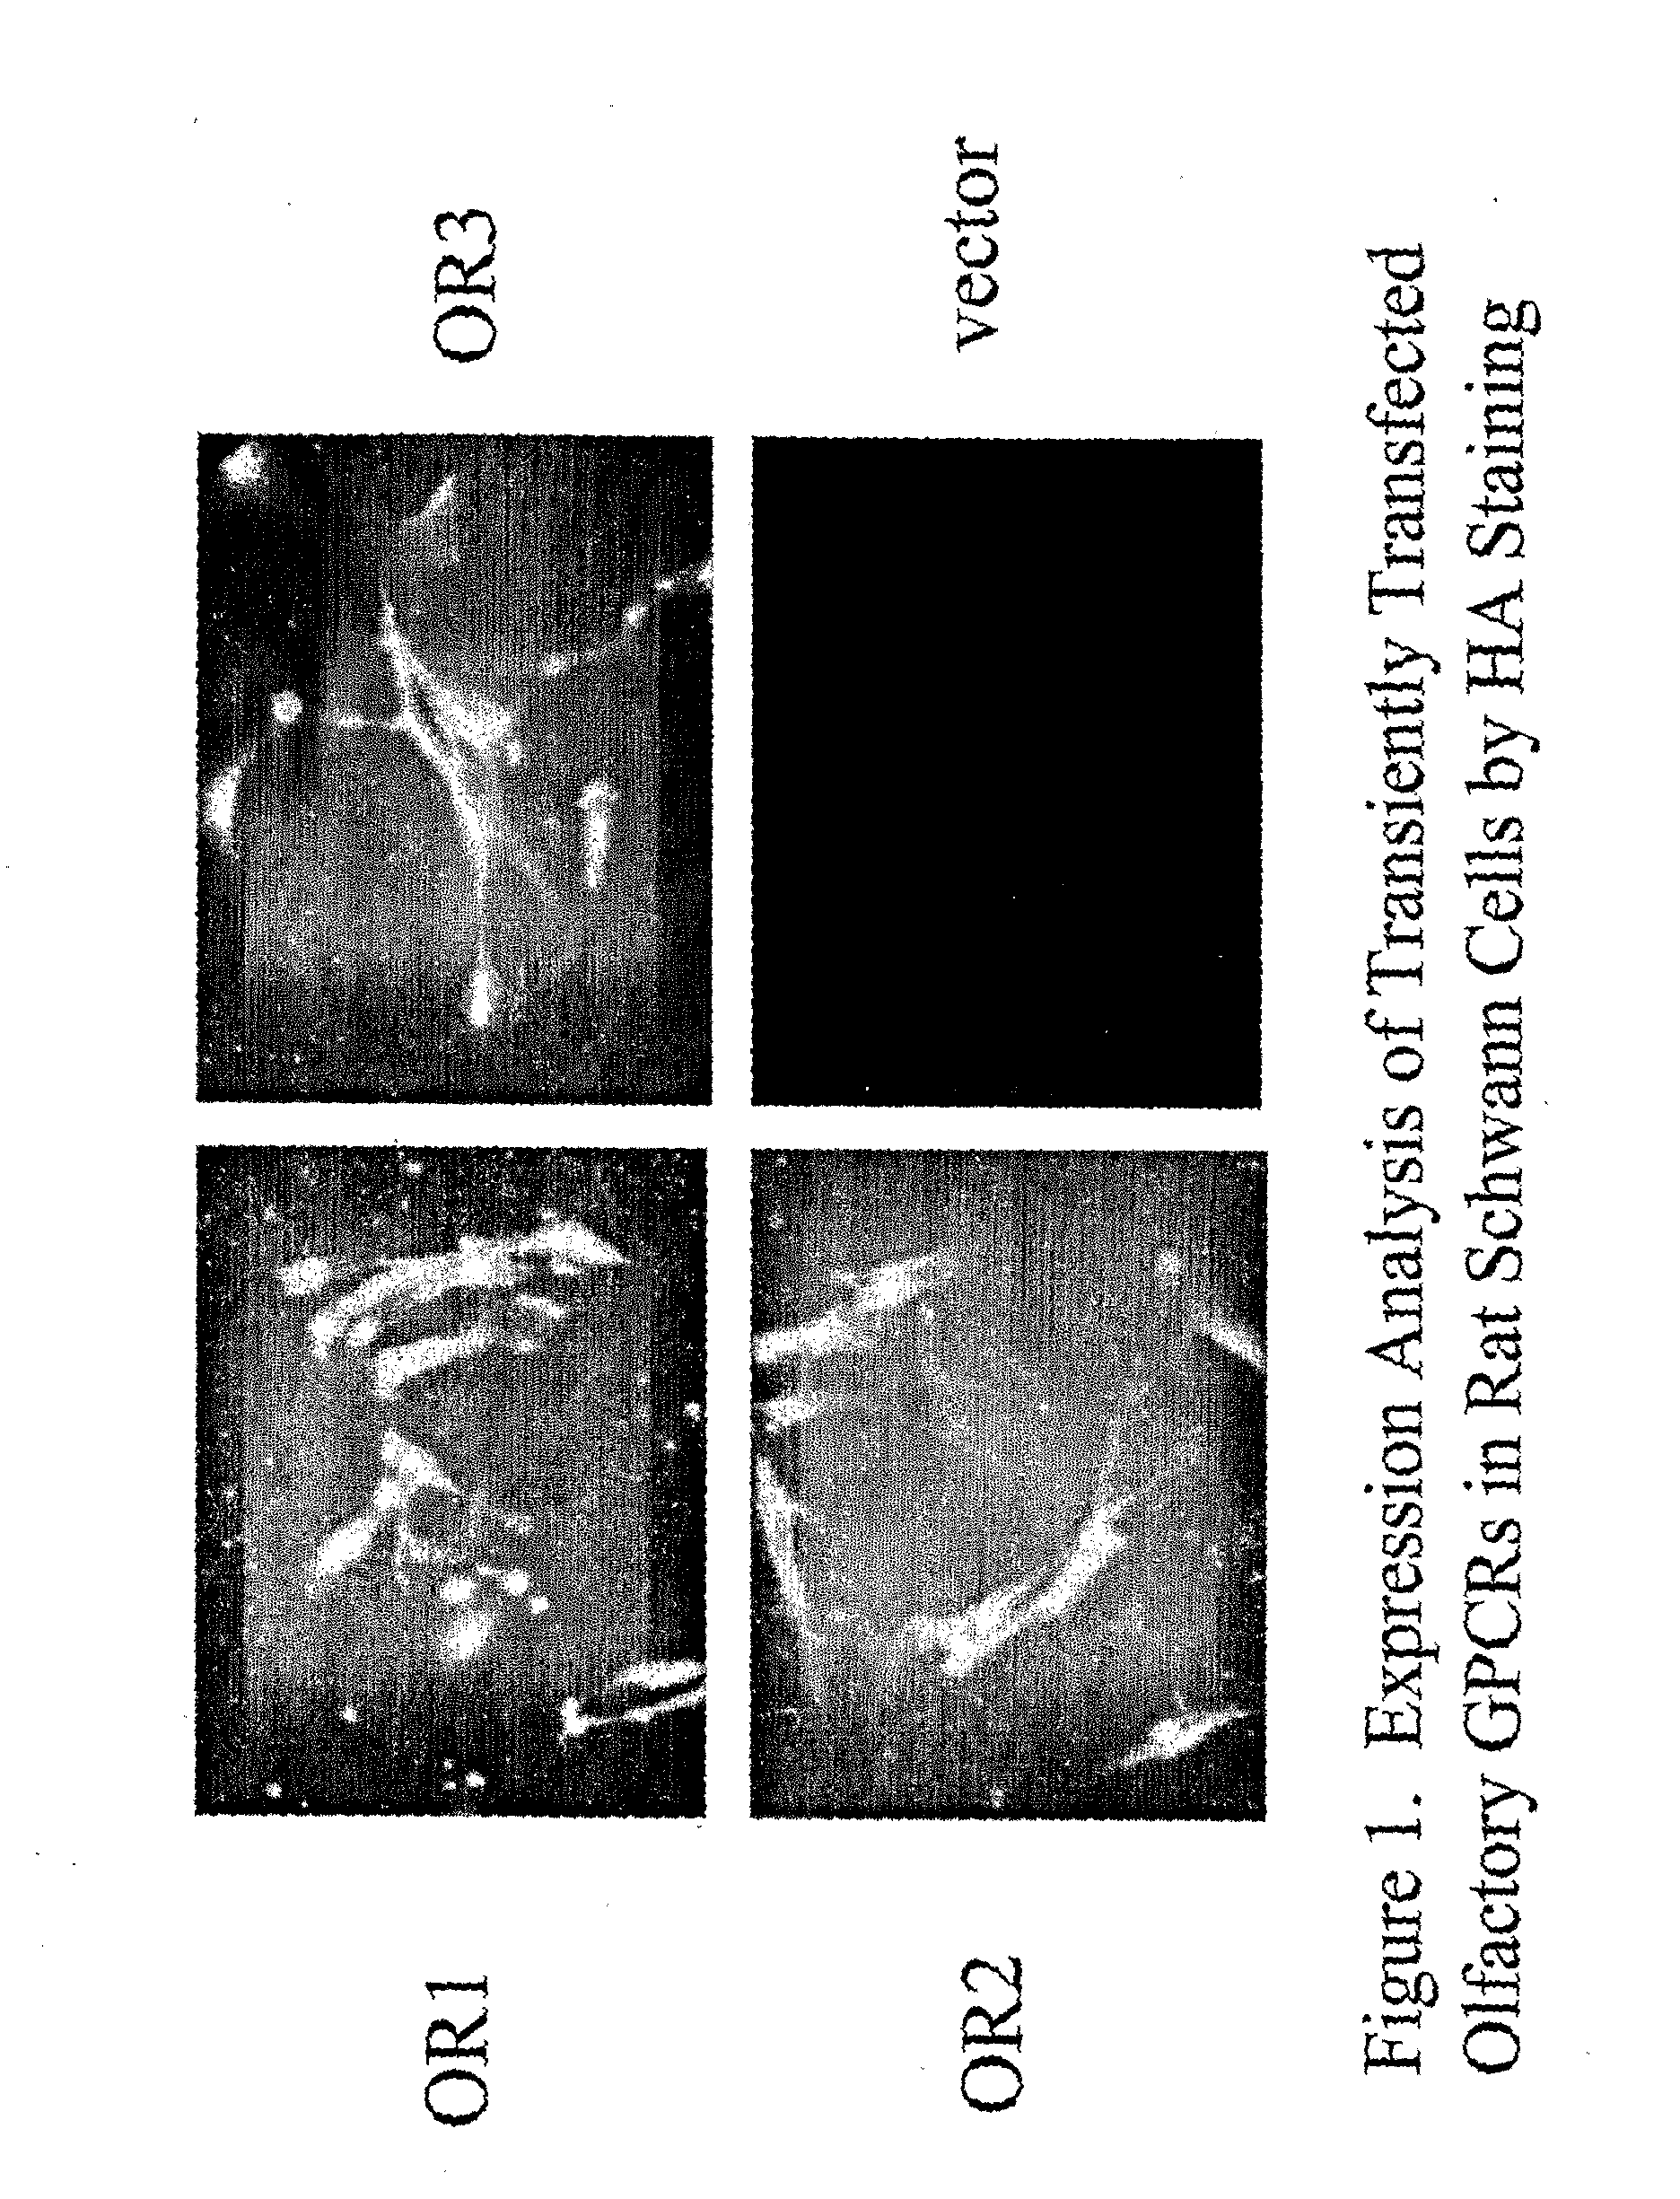 Methods for producing olfactory gpcrs